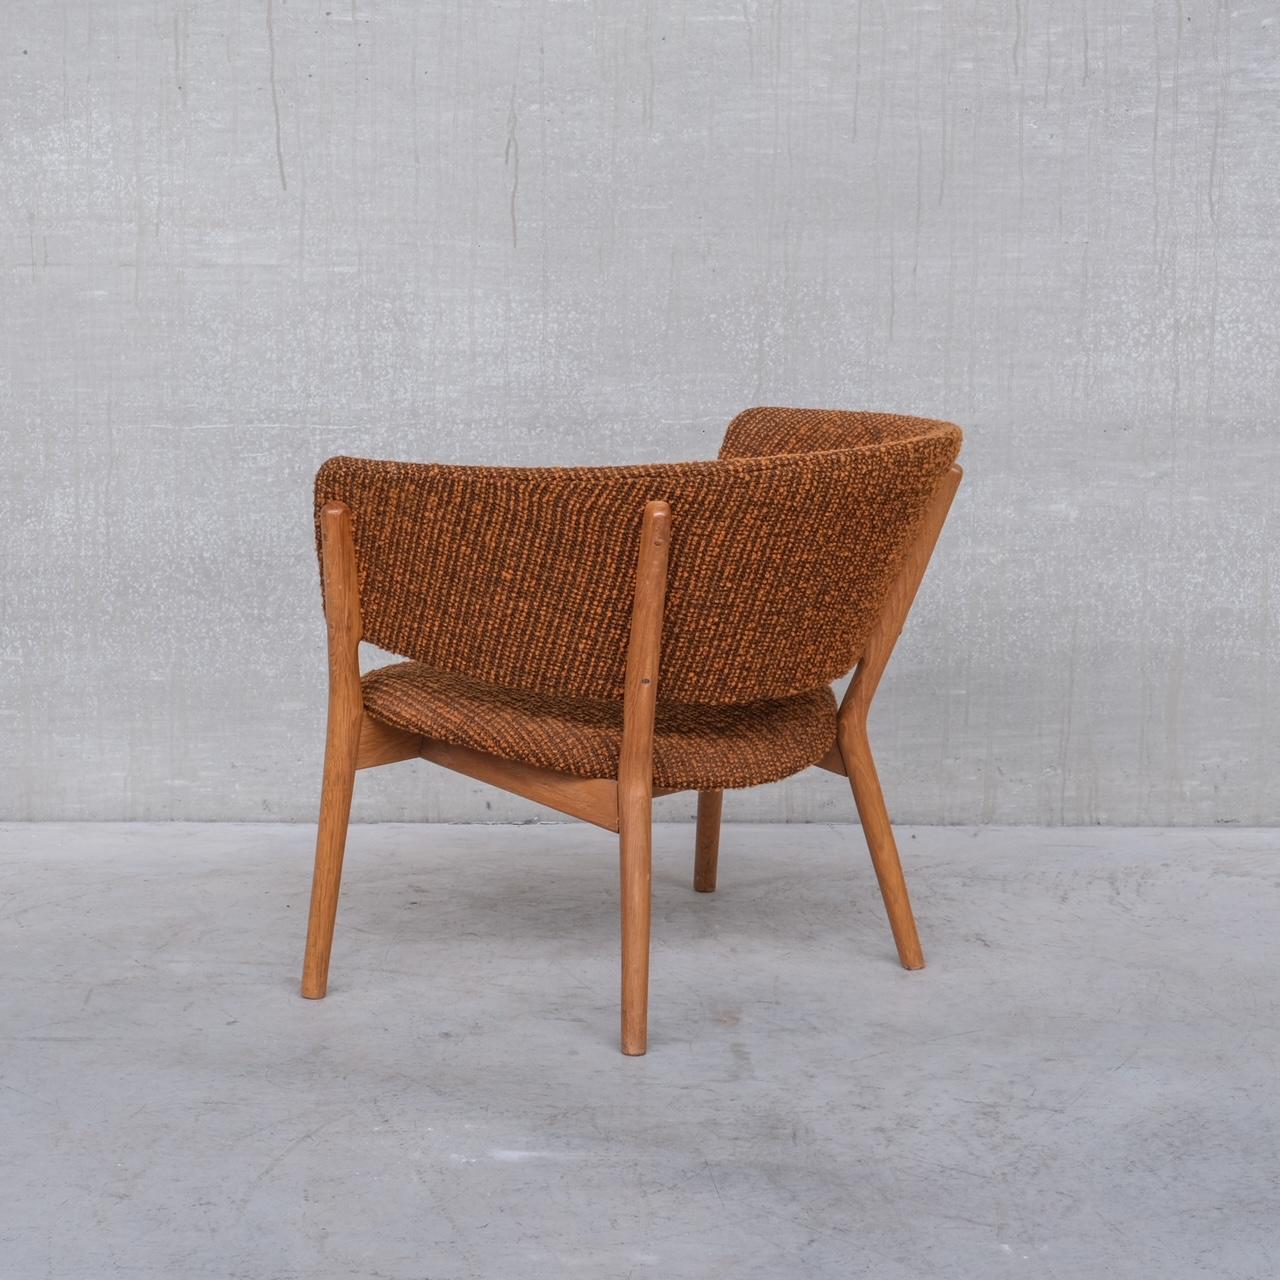 Original Nanna Ditzel ND-83 Mid-Century Open Armchair In Good Condition For Sale In London, GB